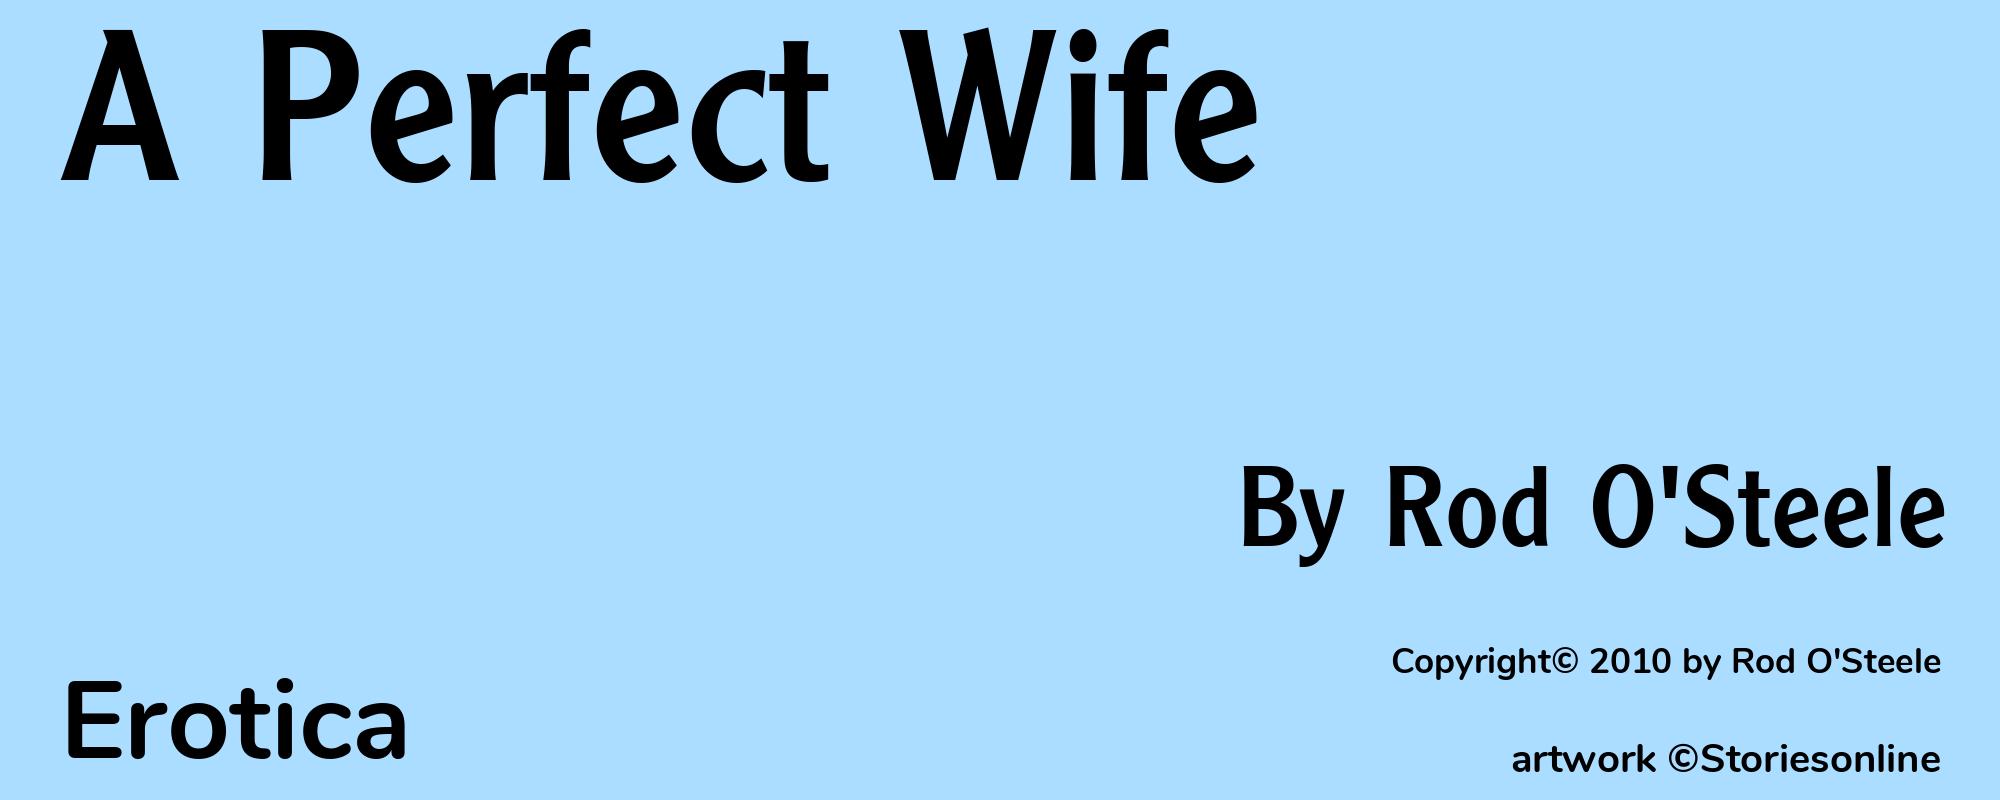 A Perfect Wife - Cover